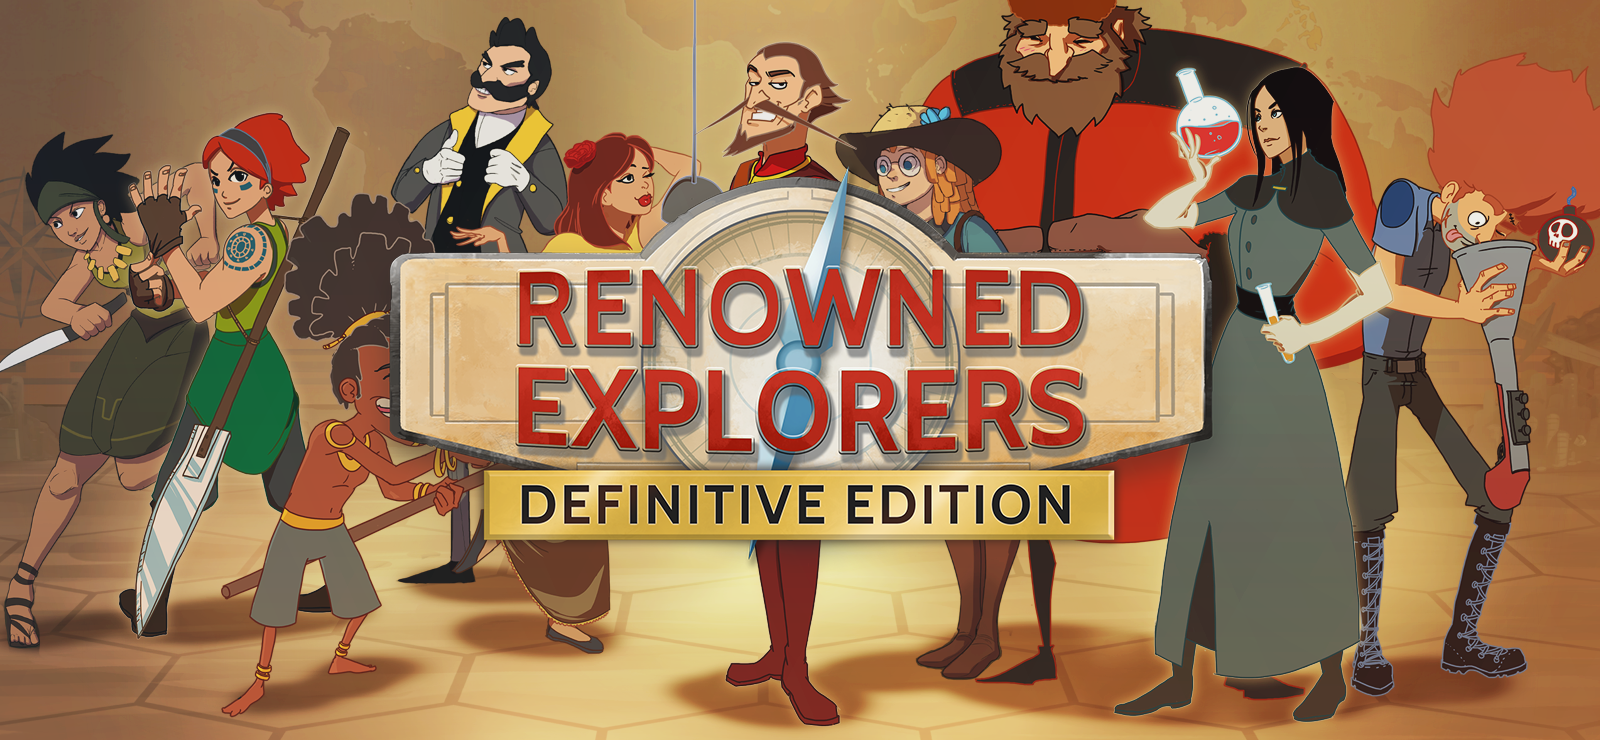 Renowned Explorers: Definitive Edition